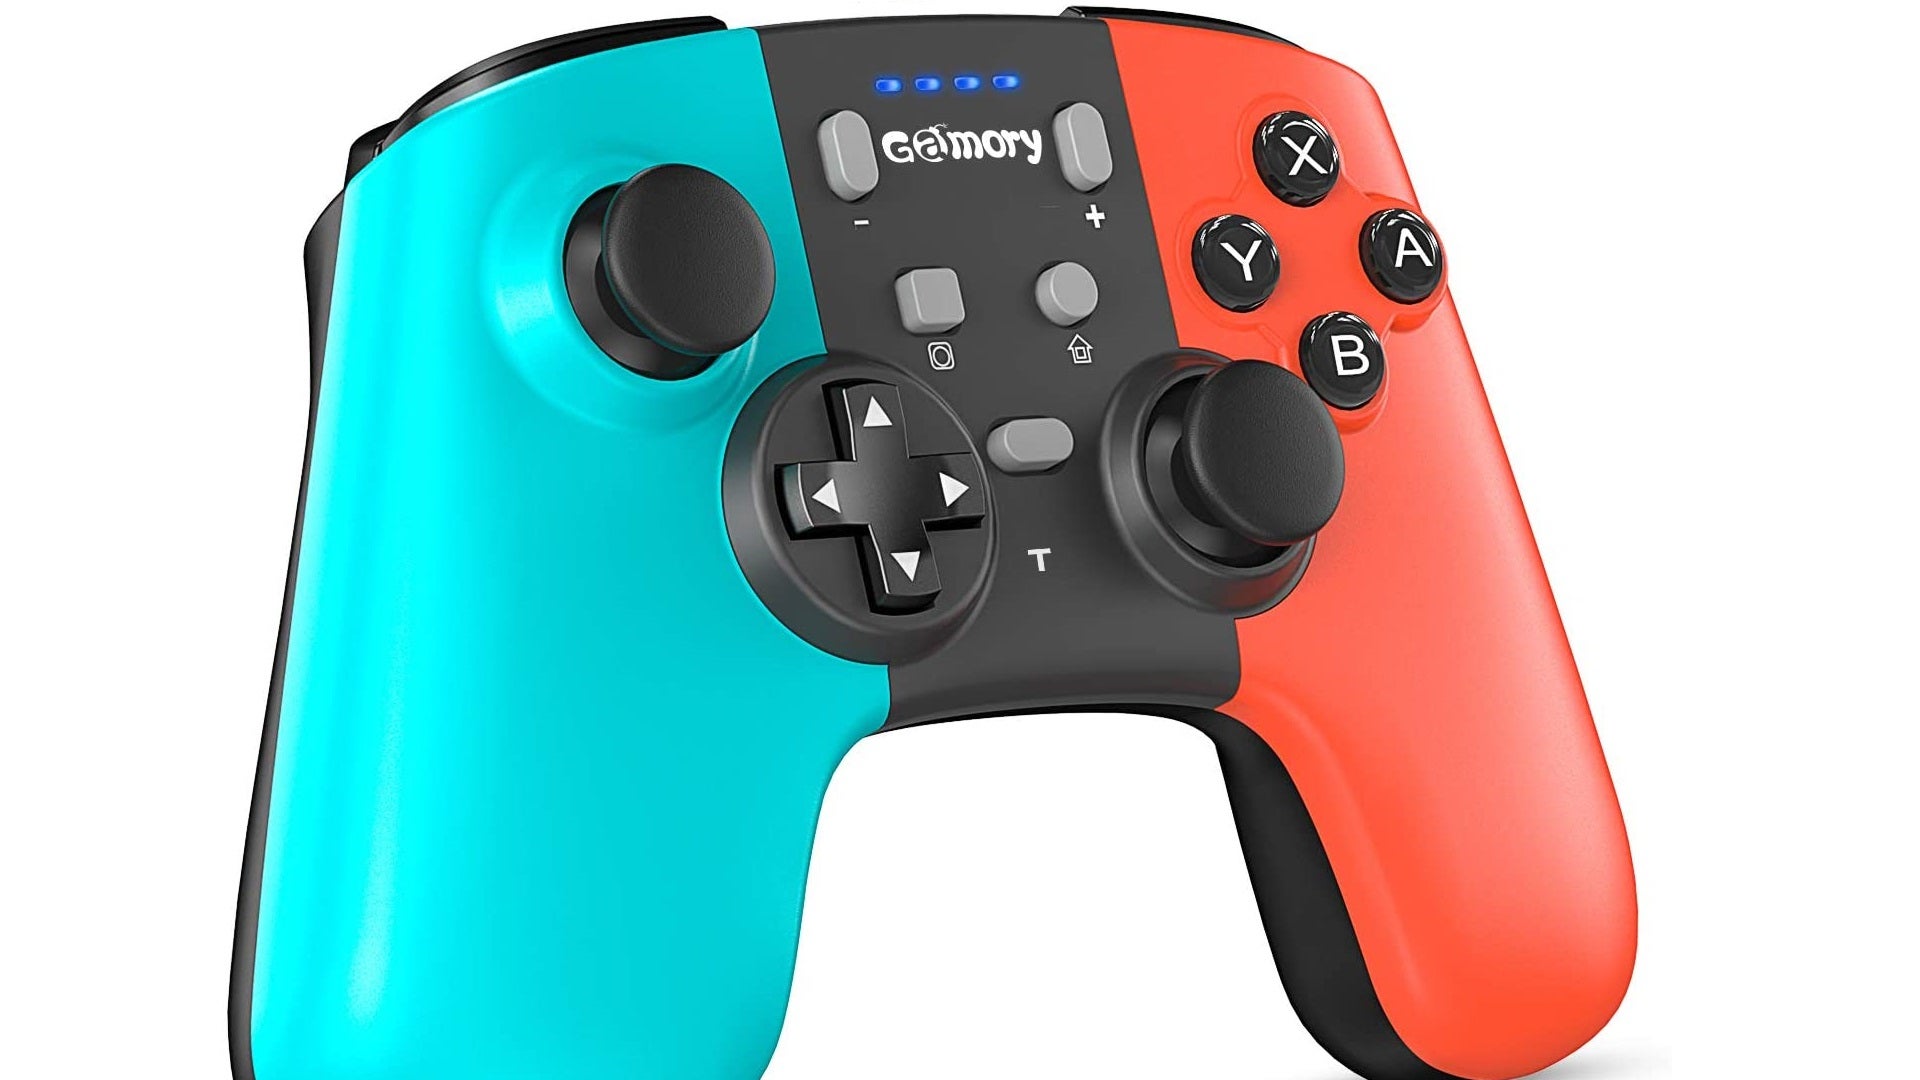 Image for Amazon's Deal of the Day drops prices on Switch controllers, gaming mice, carry cases and more